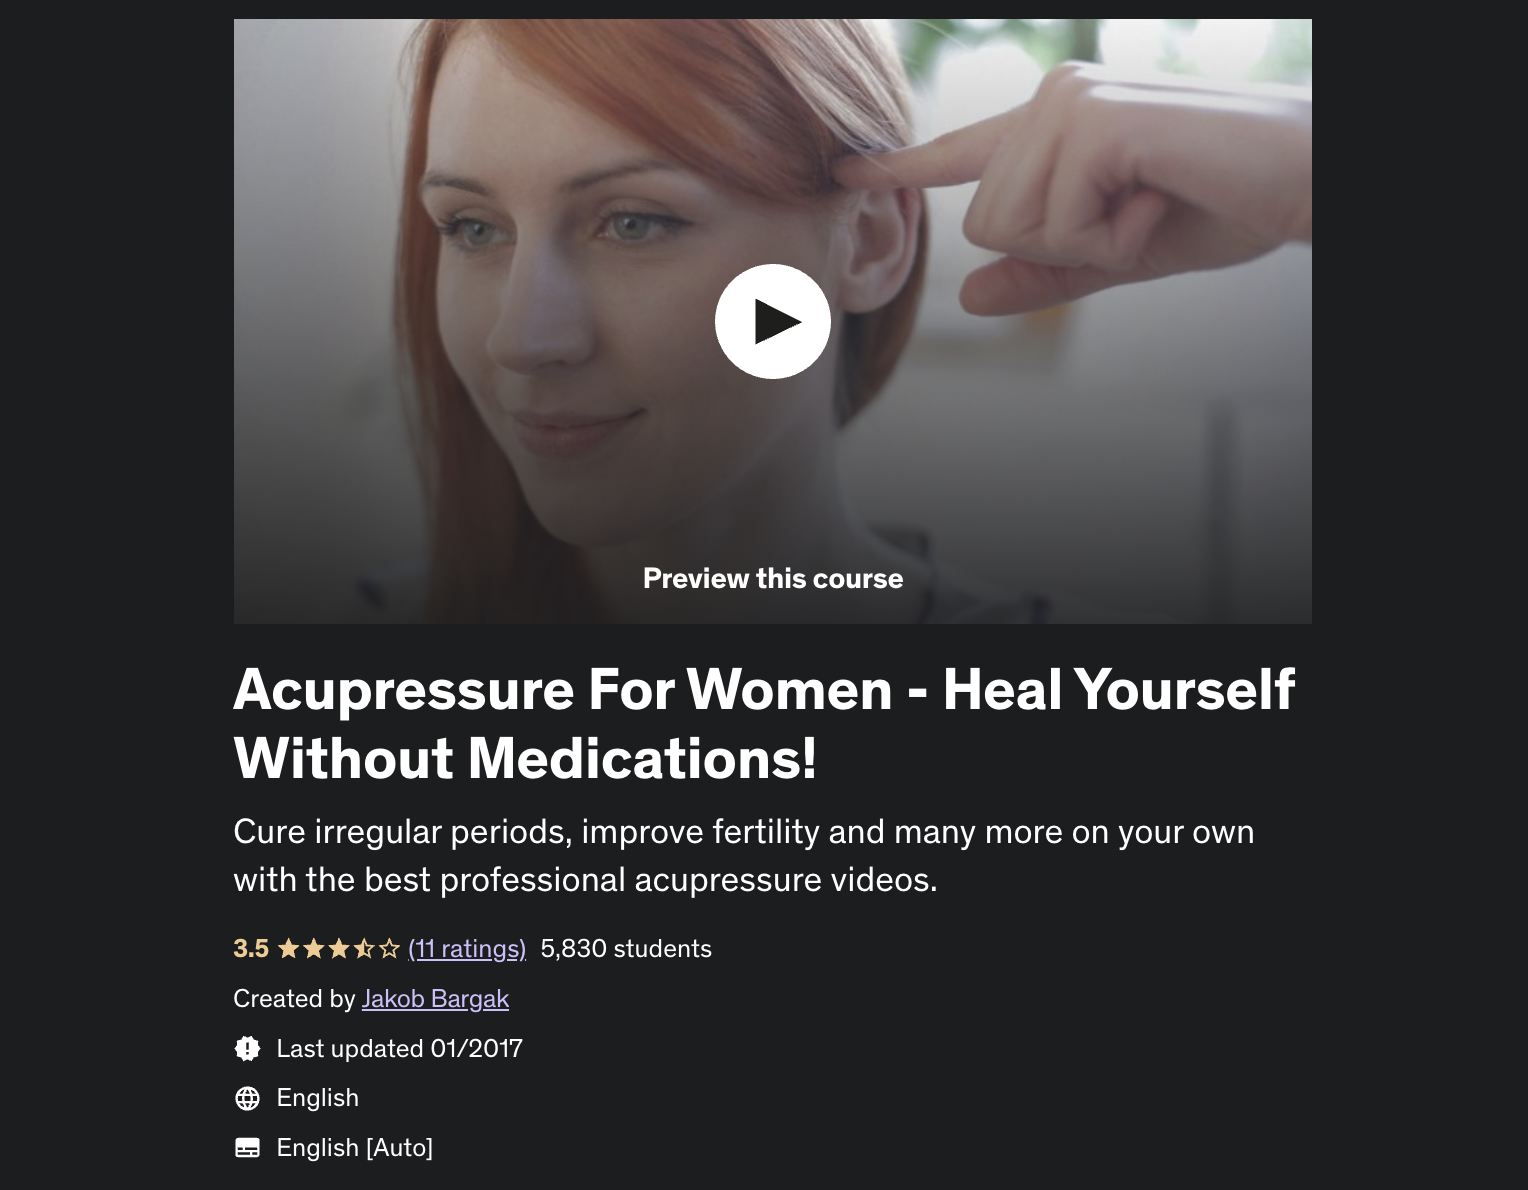 Acupressure For Women - Heal Yourself Without Medications